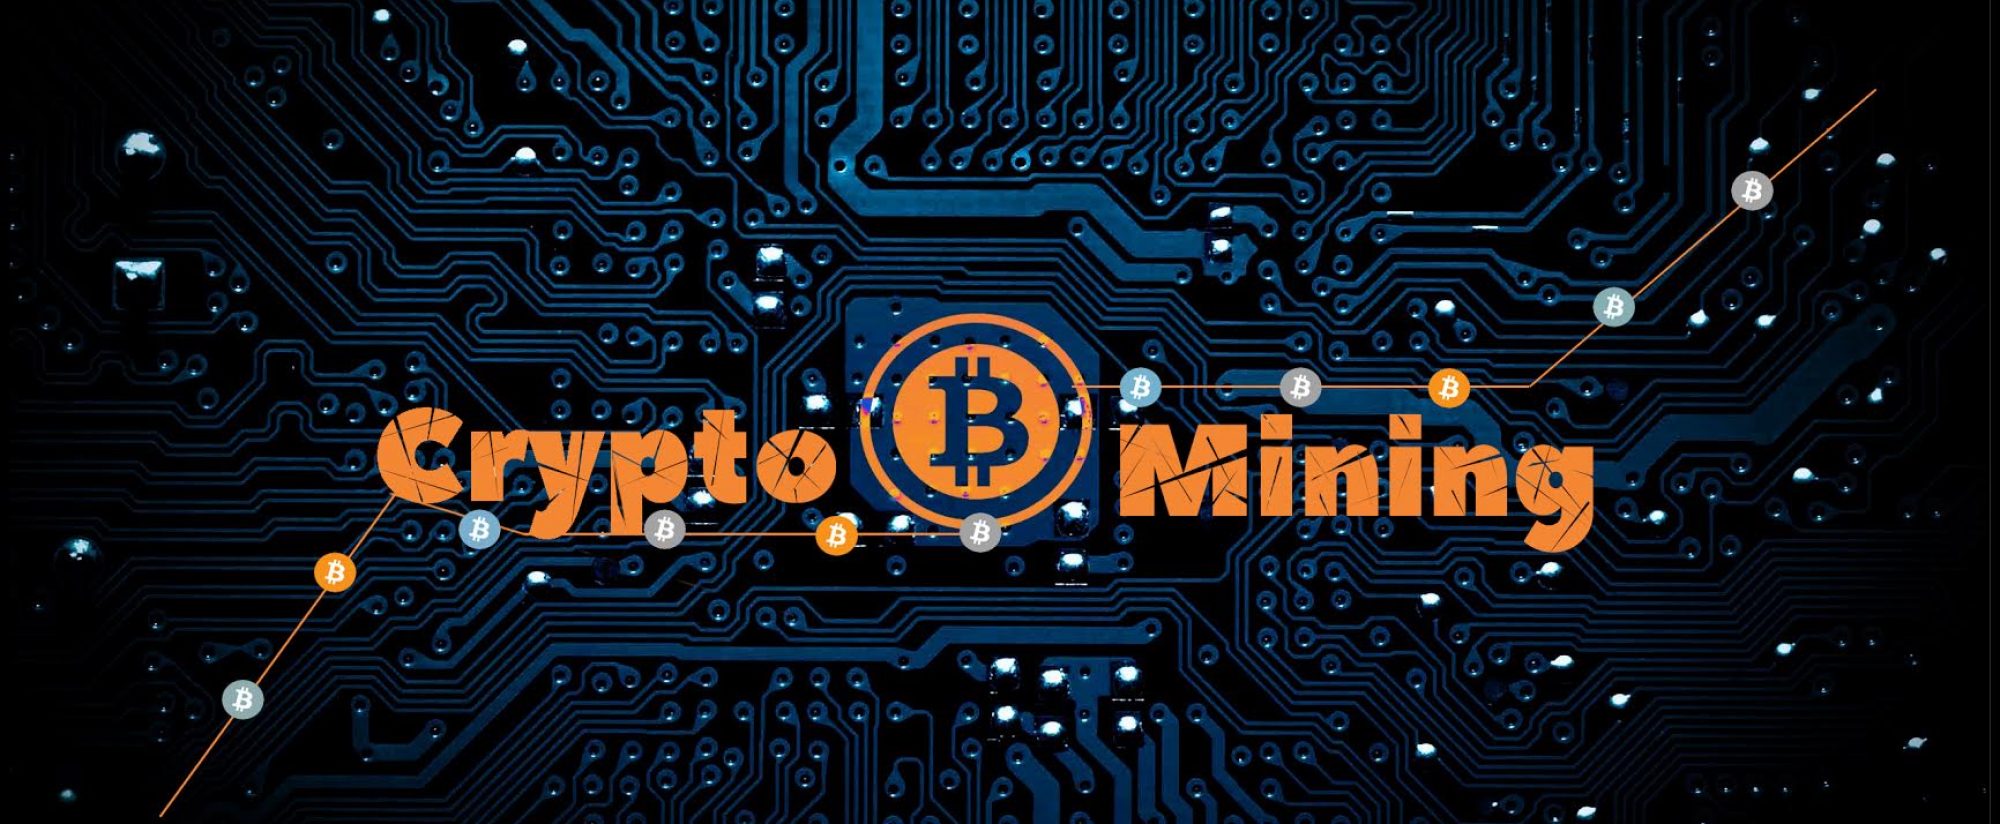 Understanding cryptomining, a new malware variant